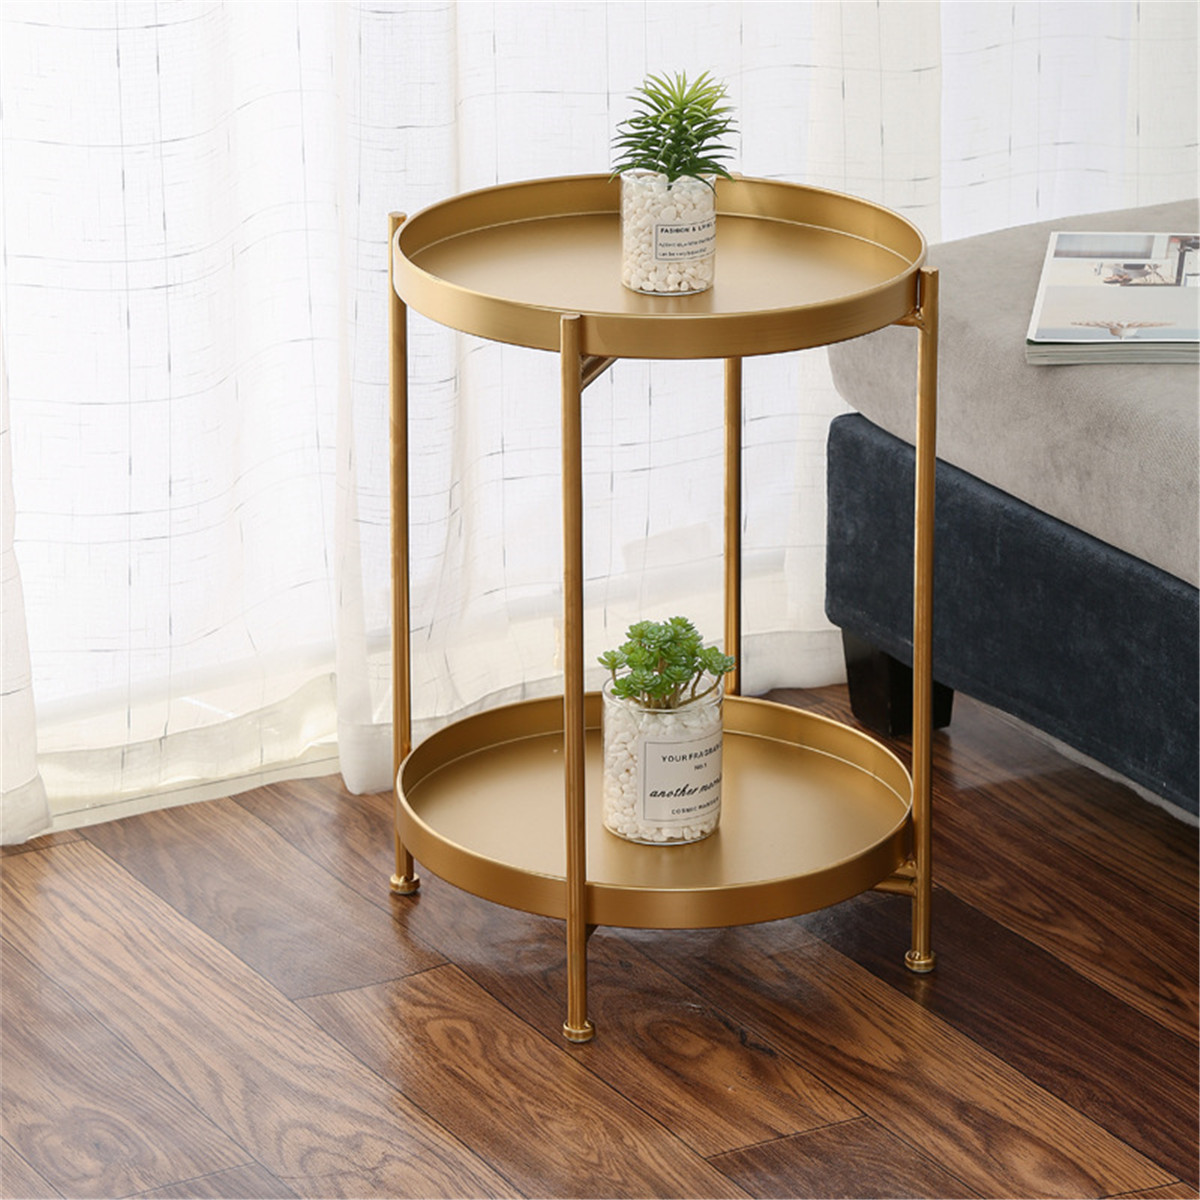 Double Layer Metal Wooden Sofa Side Coffee Table Iron Art Round Small End Tables Display Simple Living Room Bedroom